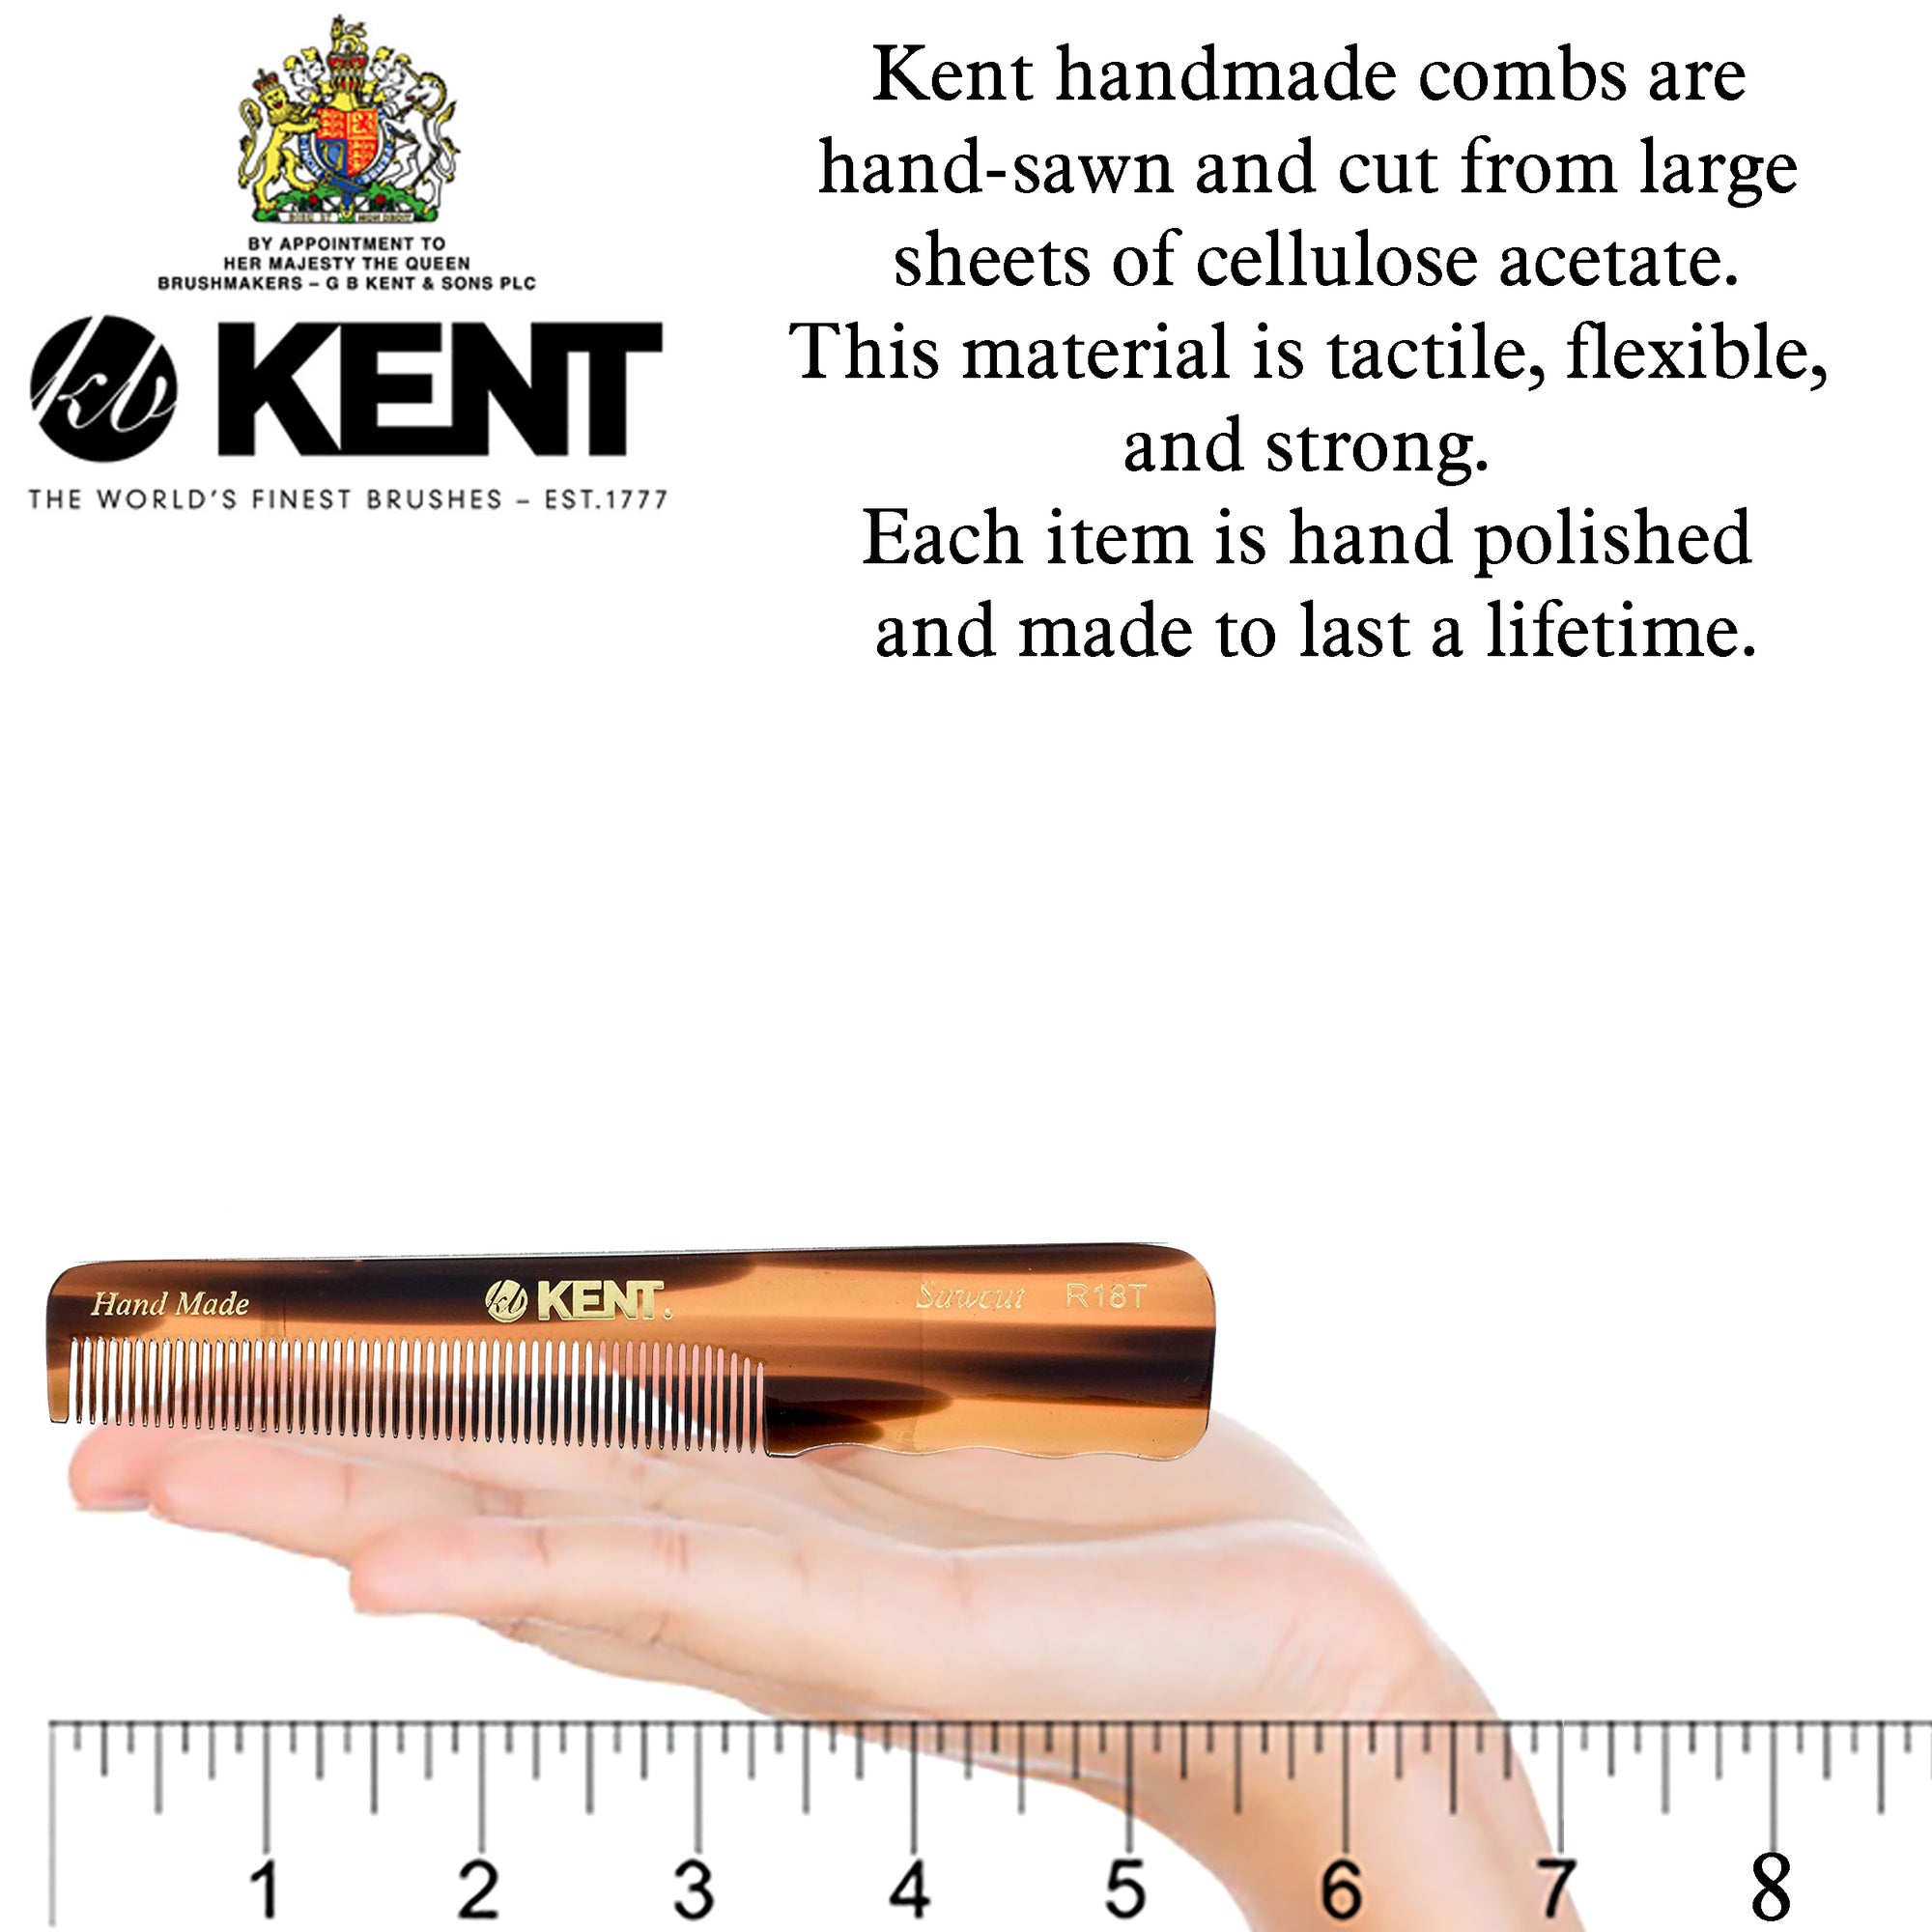 Kent R18T Handmade All Fine Tooth Pocket Comb for Men Grooming Styling